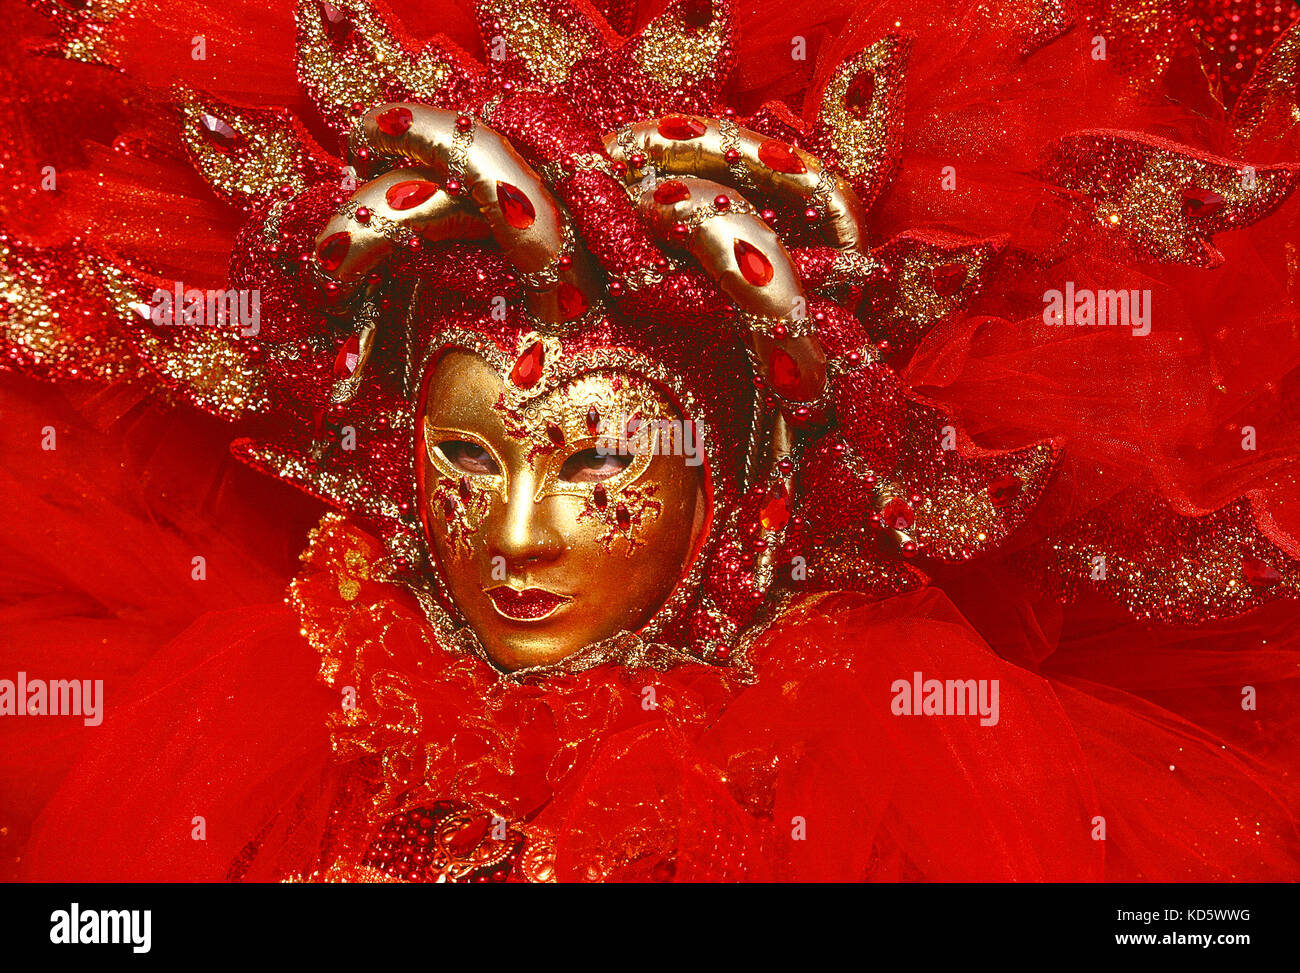 Italy. Venice. Carnival. Person in red costume. Close up of face with gold mask. Stock Photo